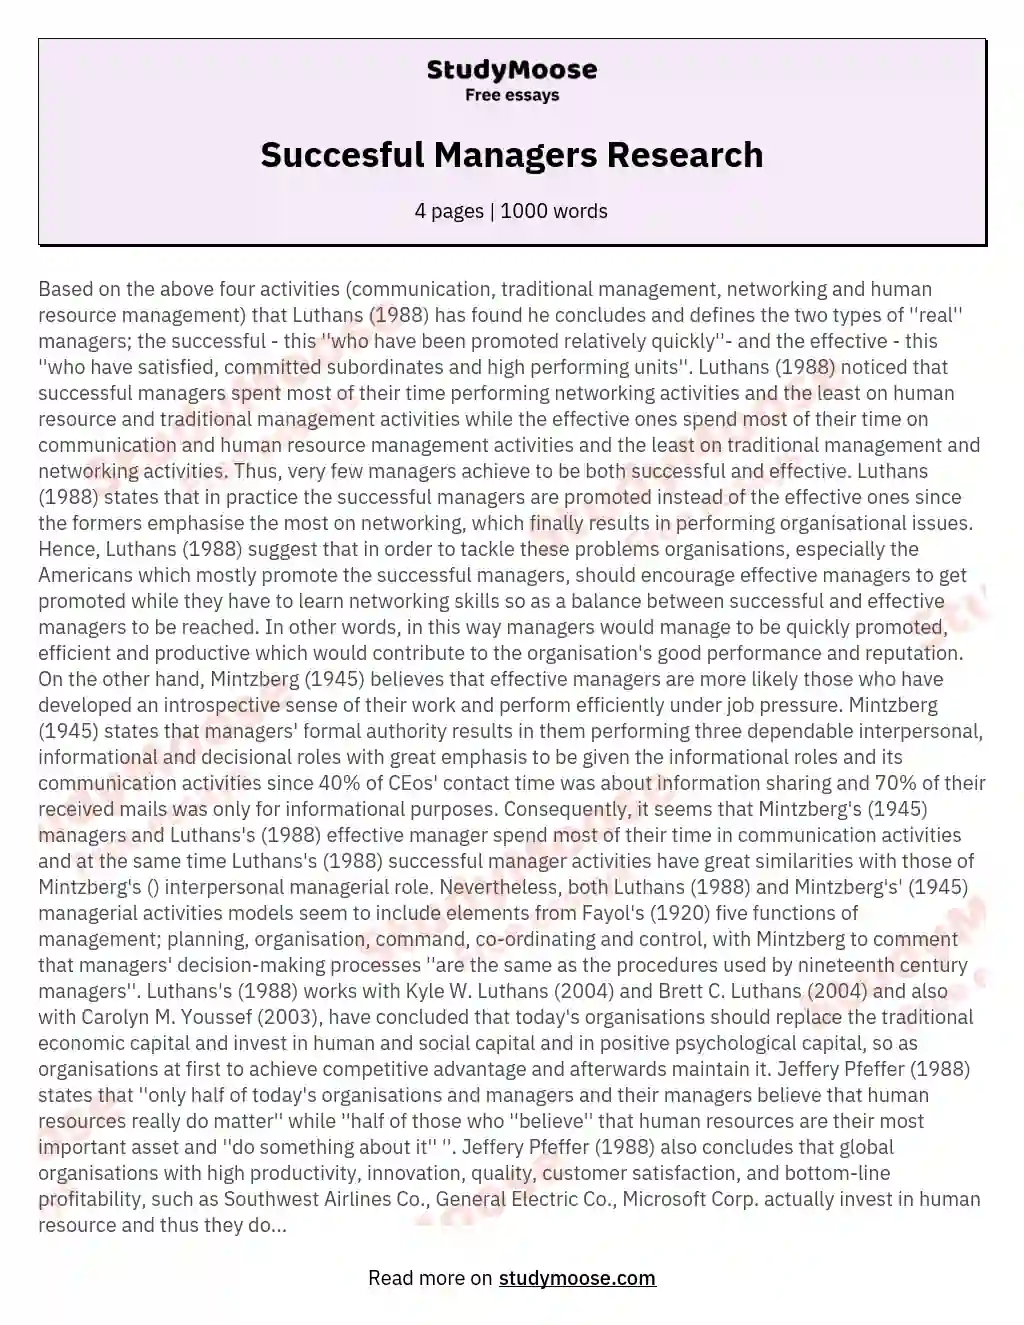 Succesful Managers Research essay